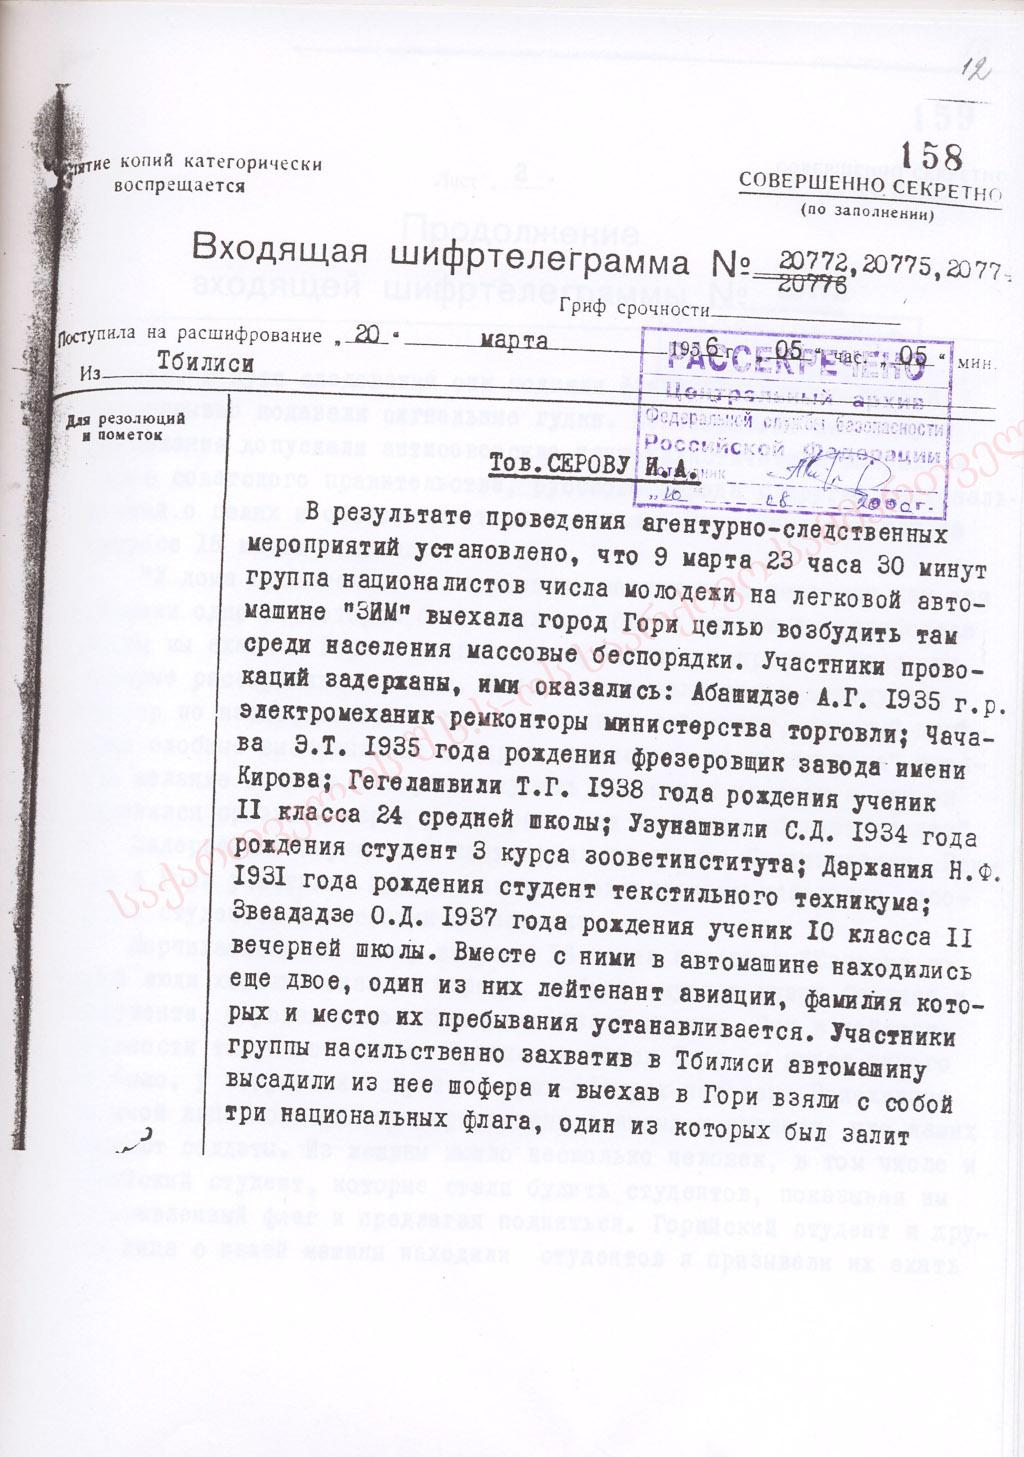 Top Secret letter, sent to Moscow by the Major General A. Inauri,Chairman of the Committee for State Security (KGB) at the Council of Ministers of the Georgian SSR, informs about the „nationalistic” behavior of the group of the demonstration participants who drove from Tbilisi to city Gori on March 9th, 1956. № 20772